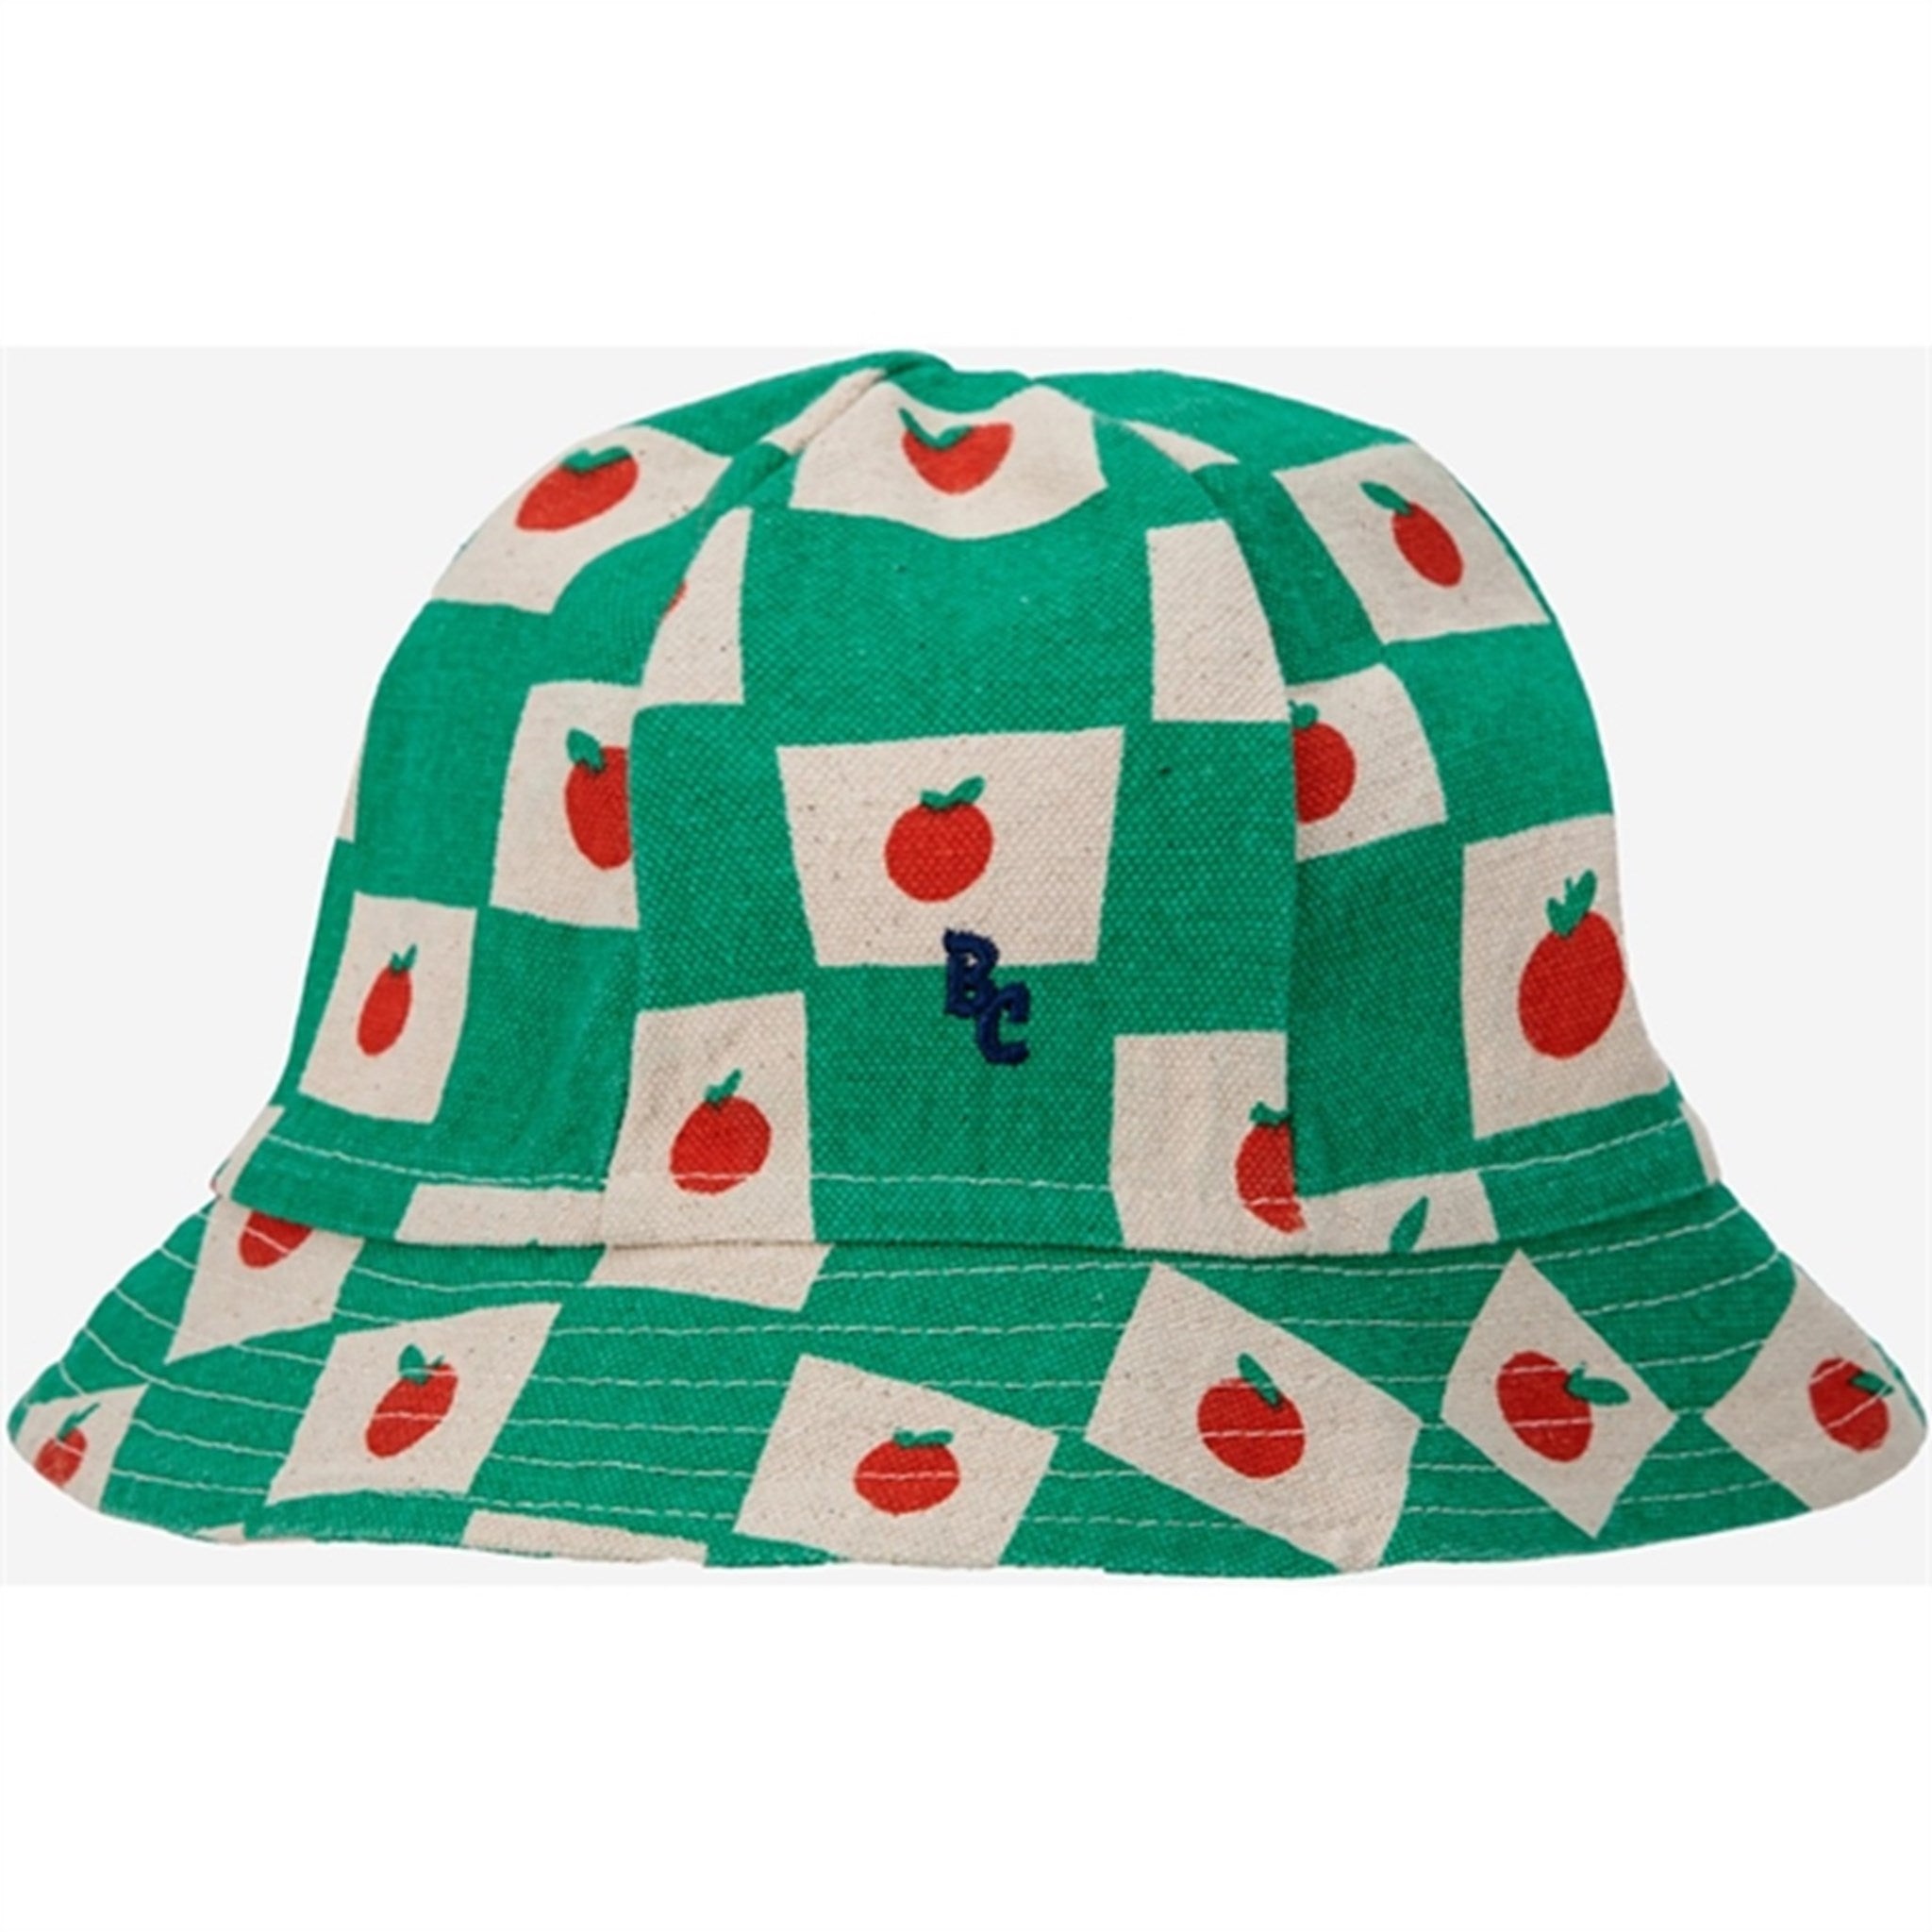 Bobo Choses Baby Tomato All Over Hat Offwhite